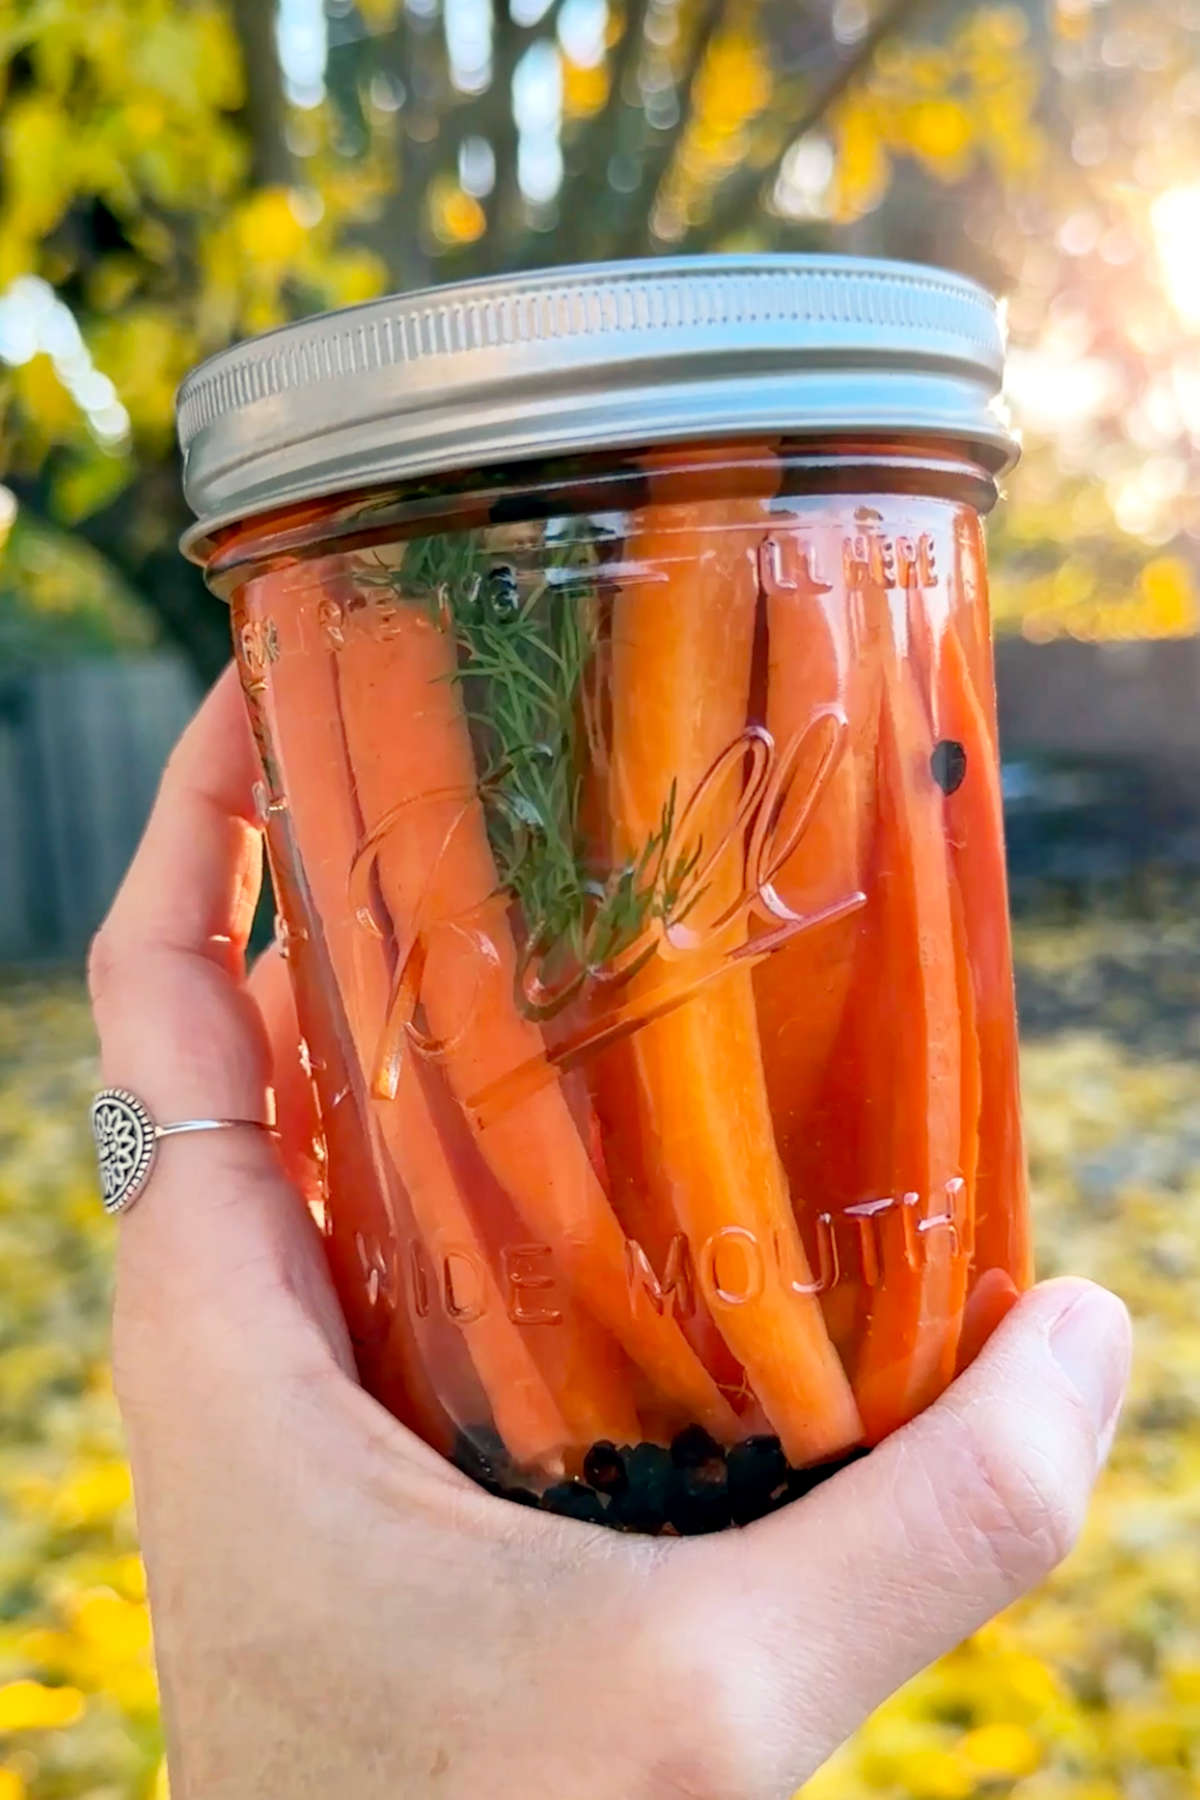 A hand holding up a jar of pickled carrots.